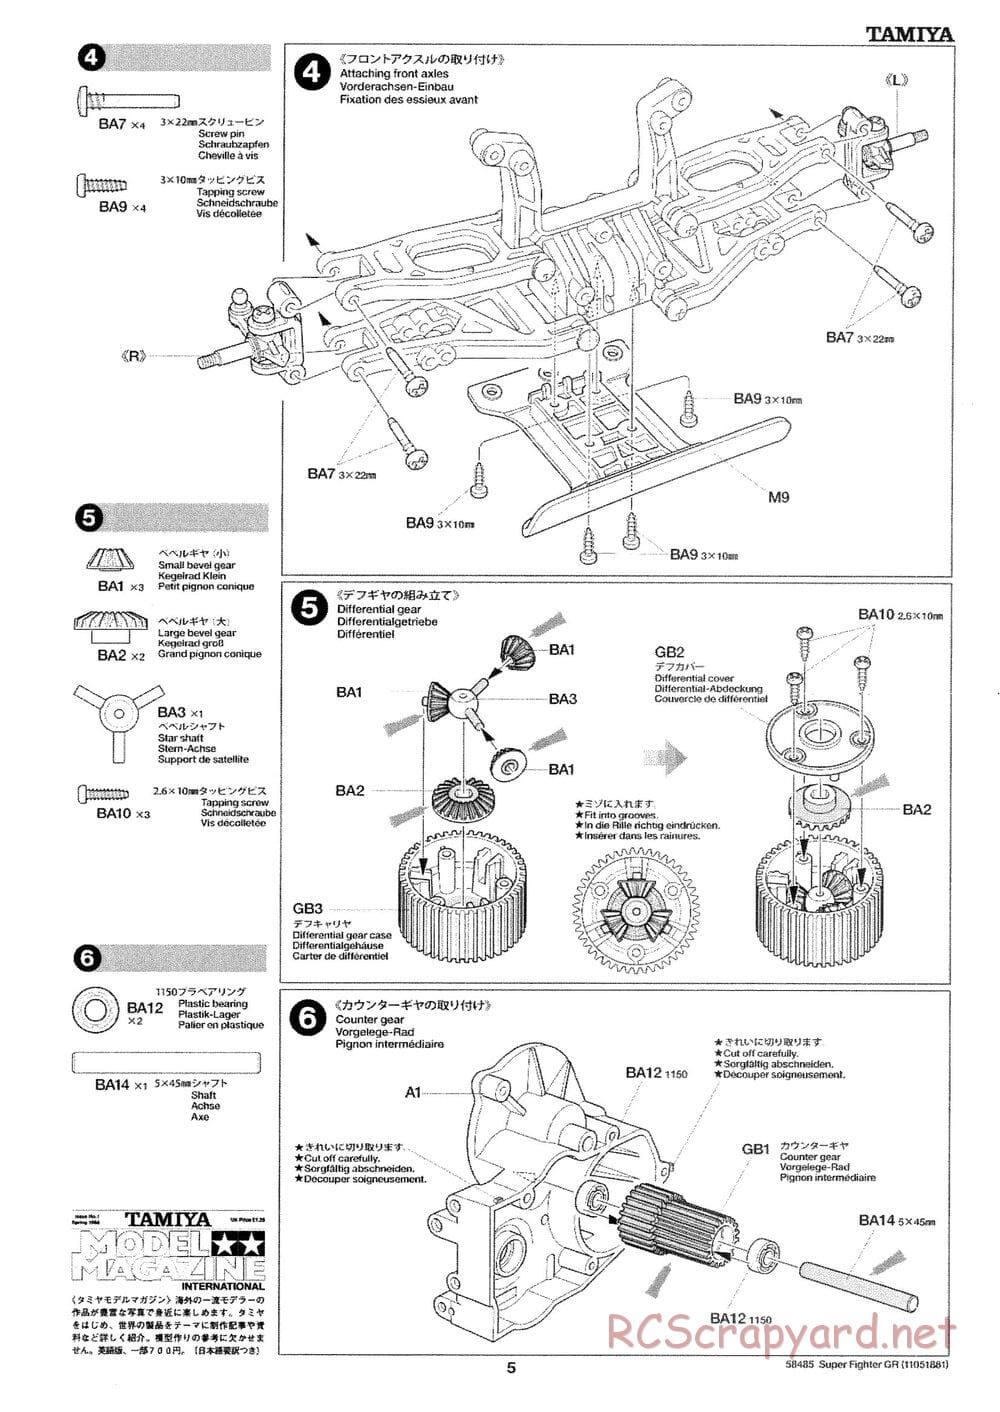 Tamiya - Super Fighter GR - DT-02 Chassis - Manual - Page 5